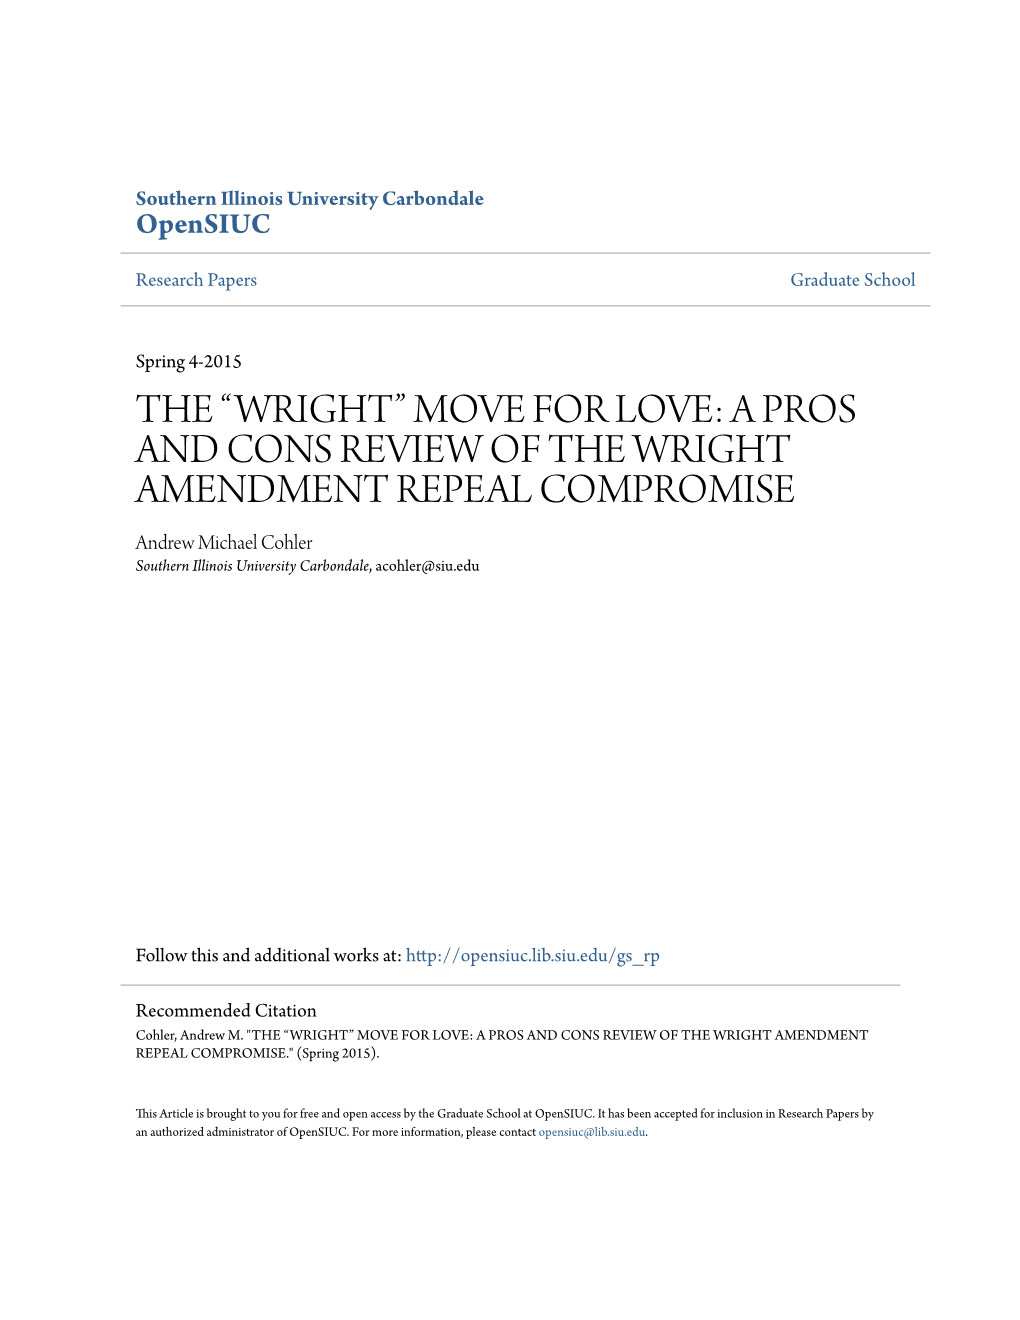 The “Wright” Move for Love: a Pros and Cons Review of The